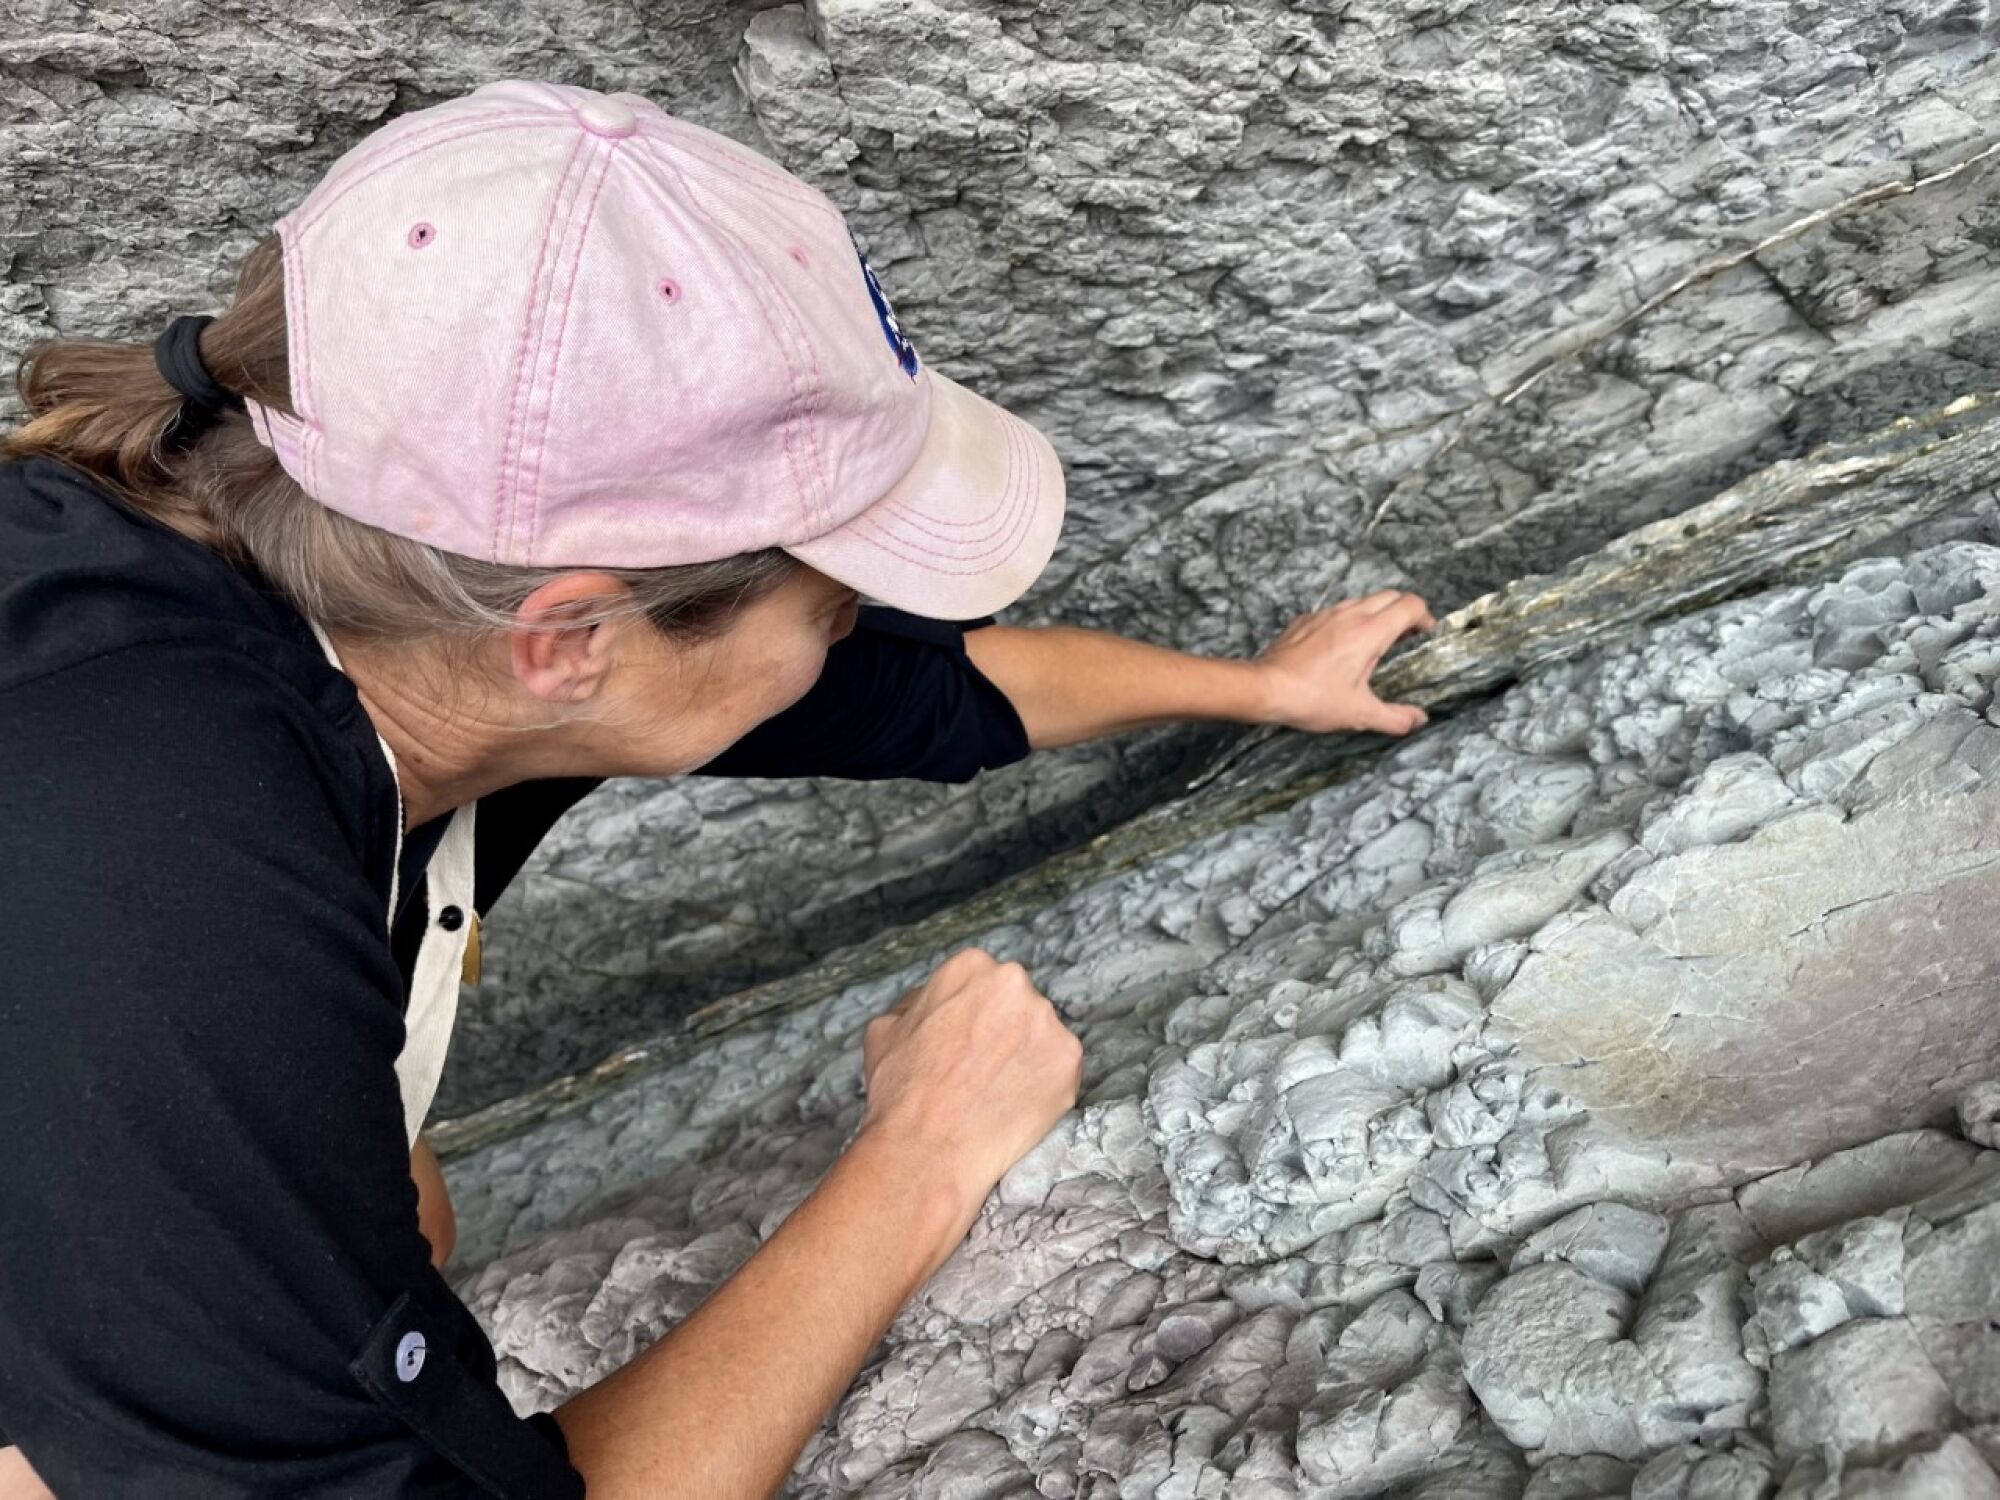 La Brea Tar Pits curator Regan Dunn places her hand on the K/Pg boundary of Zumaia’s flysch in Zumaia, Spain.